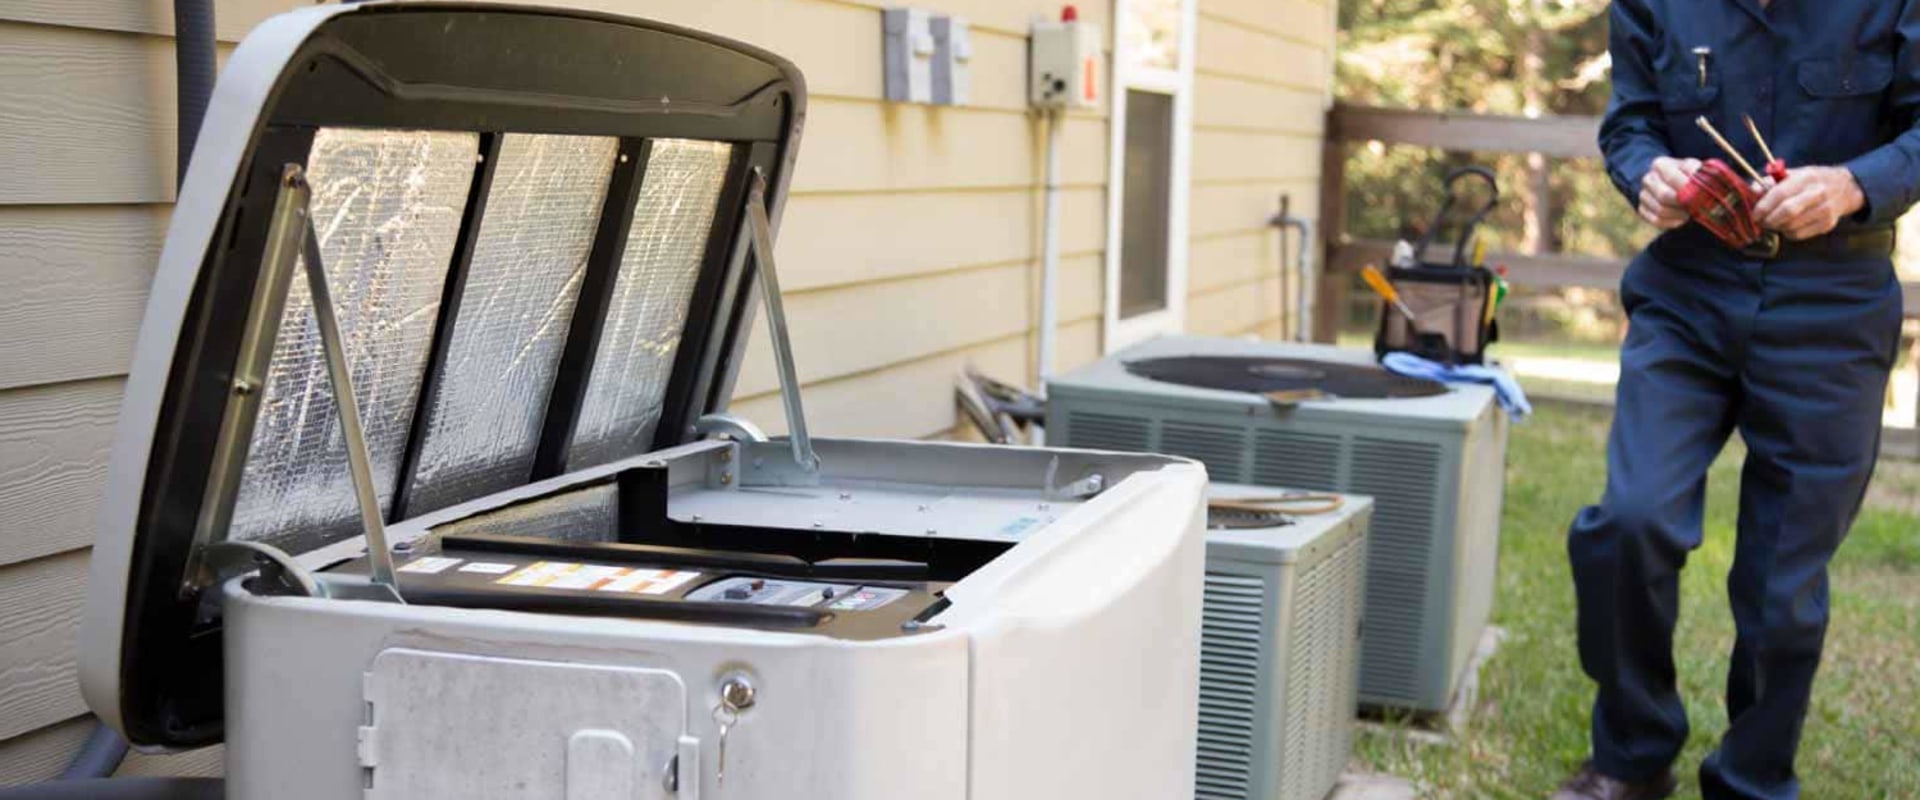 3 Reasons Why You Should Invest in an HVAC Maintenance Contract